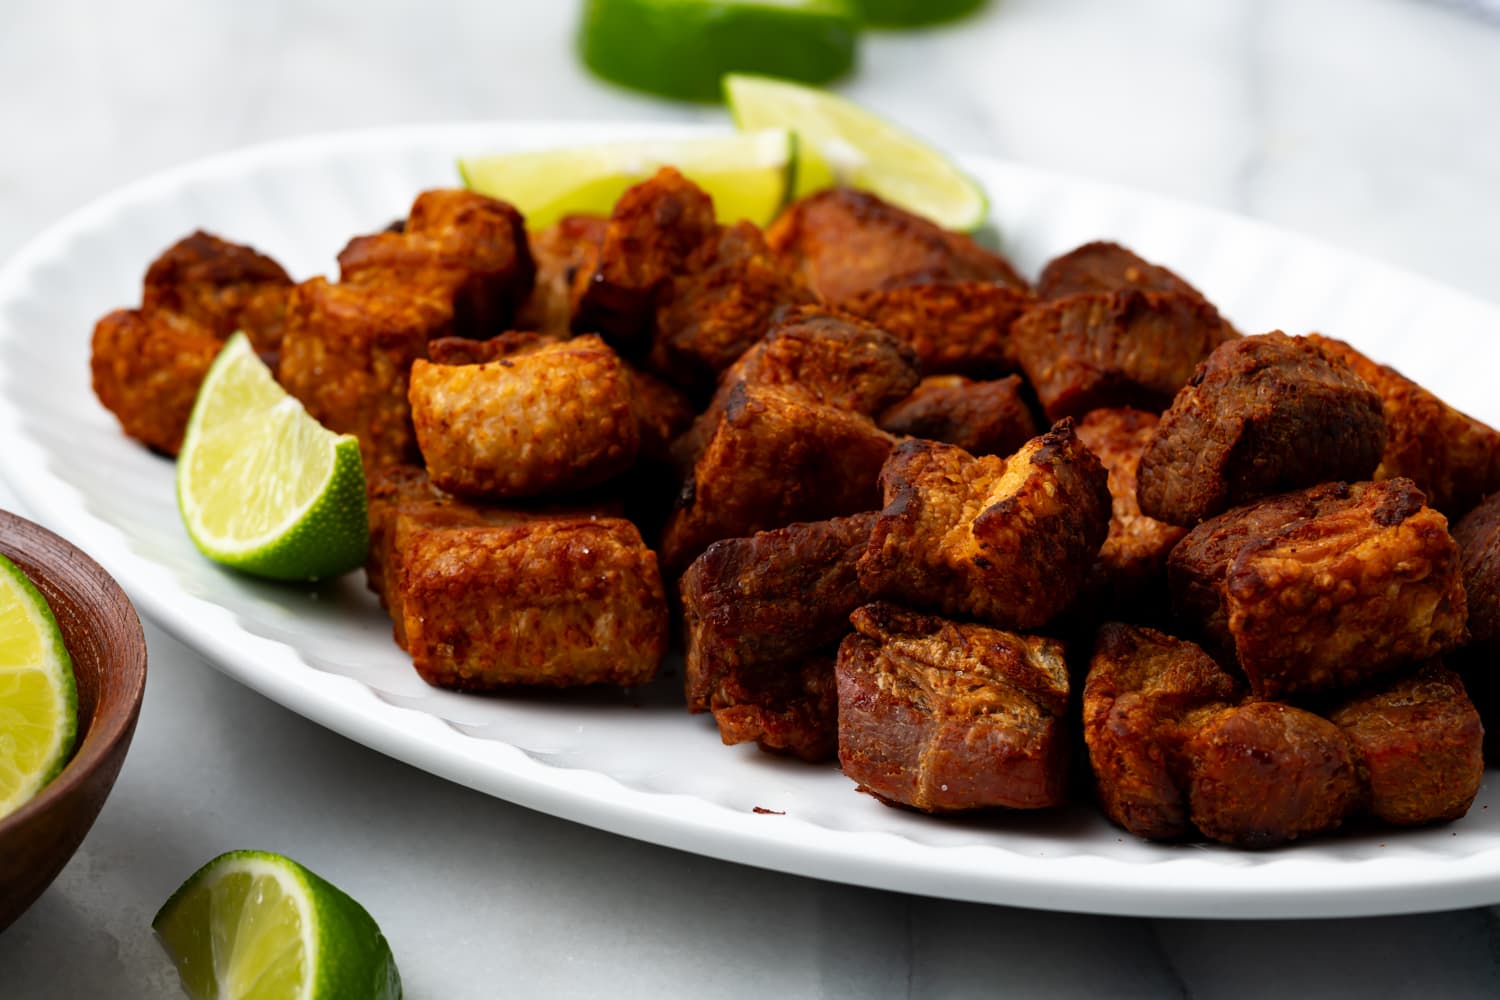 chicharrones de puerco on a white platter with lime slices garnishing.